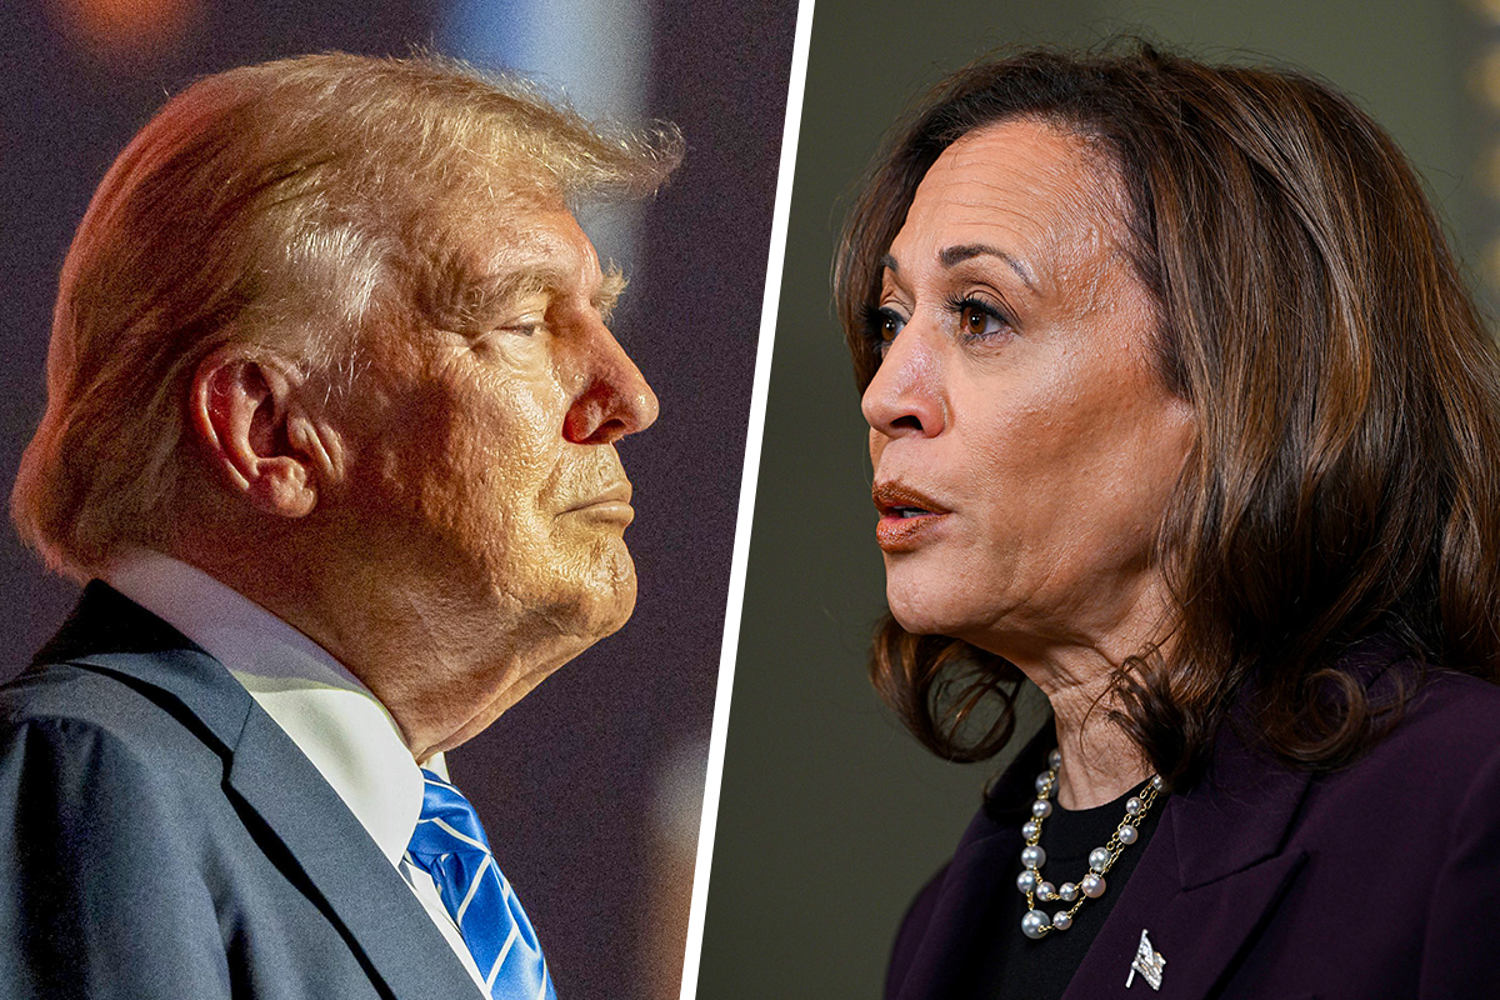 Harris campaign says Trump is ‘running scared’ after he floats Fox News debate with new rules